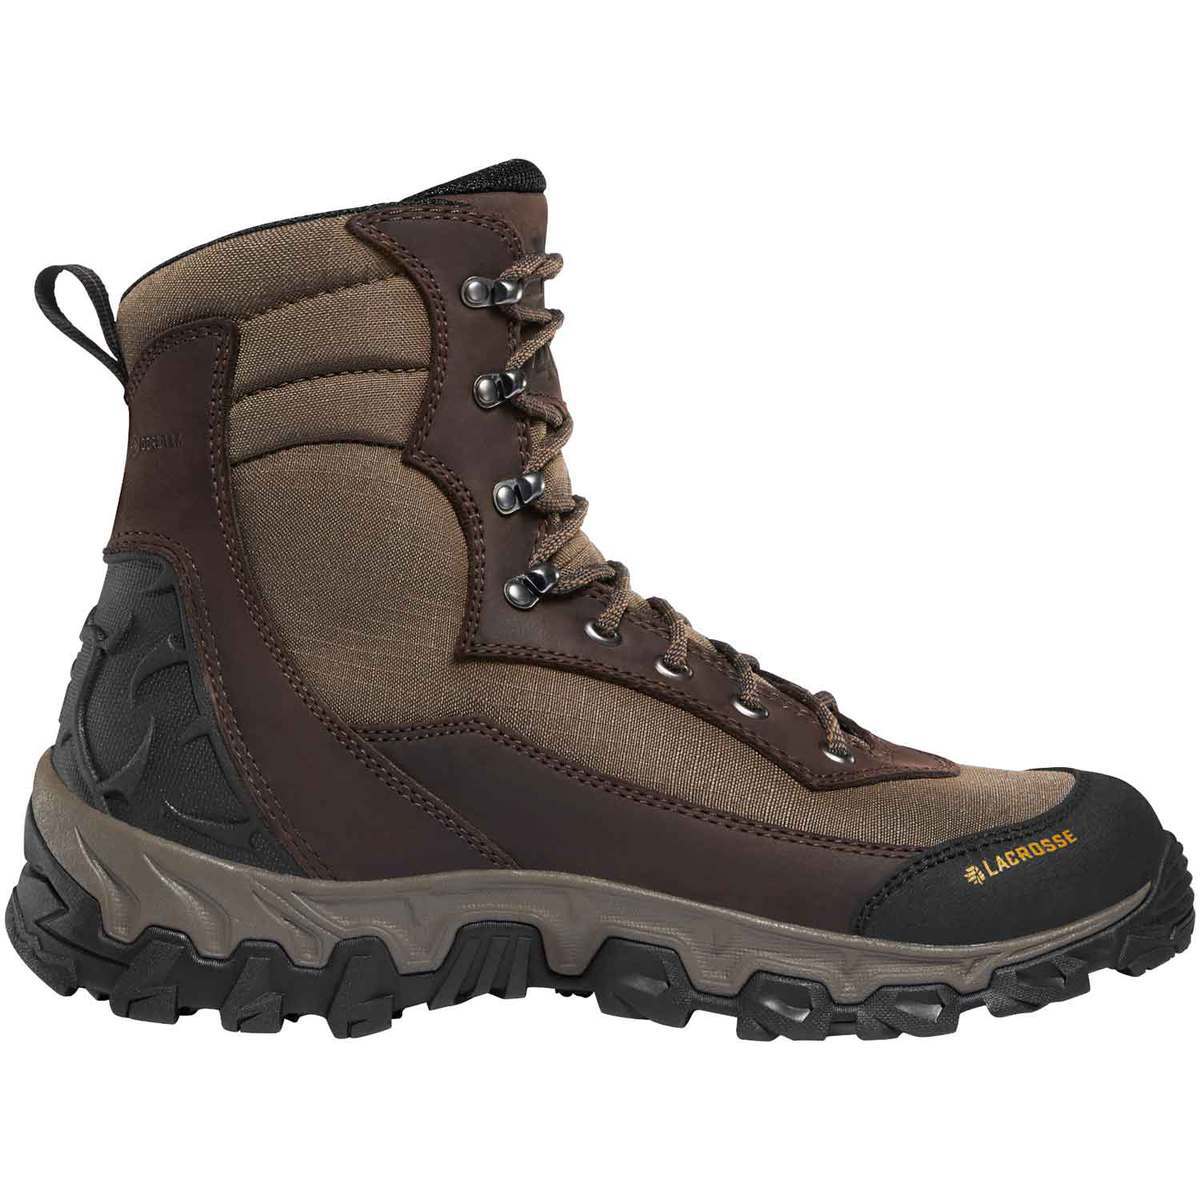 LaCrosse Men's Lodestar 400g Insulated Waterproof Hunting Boots ...